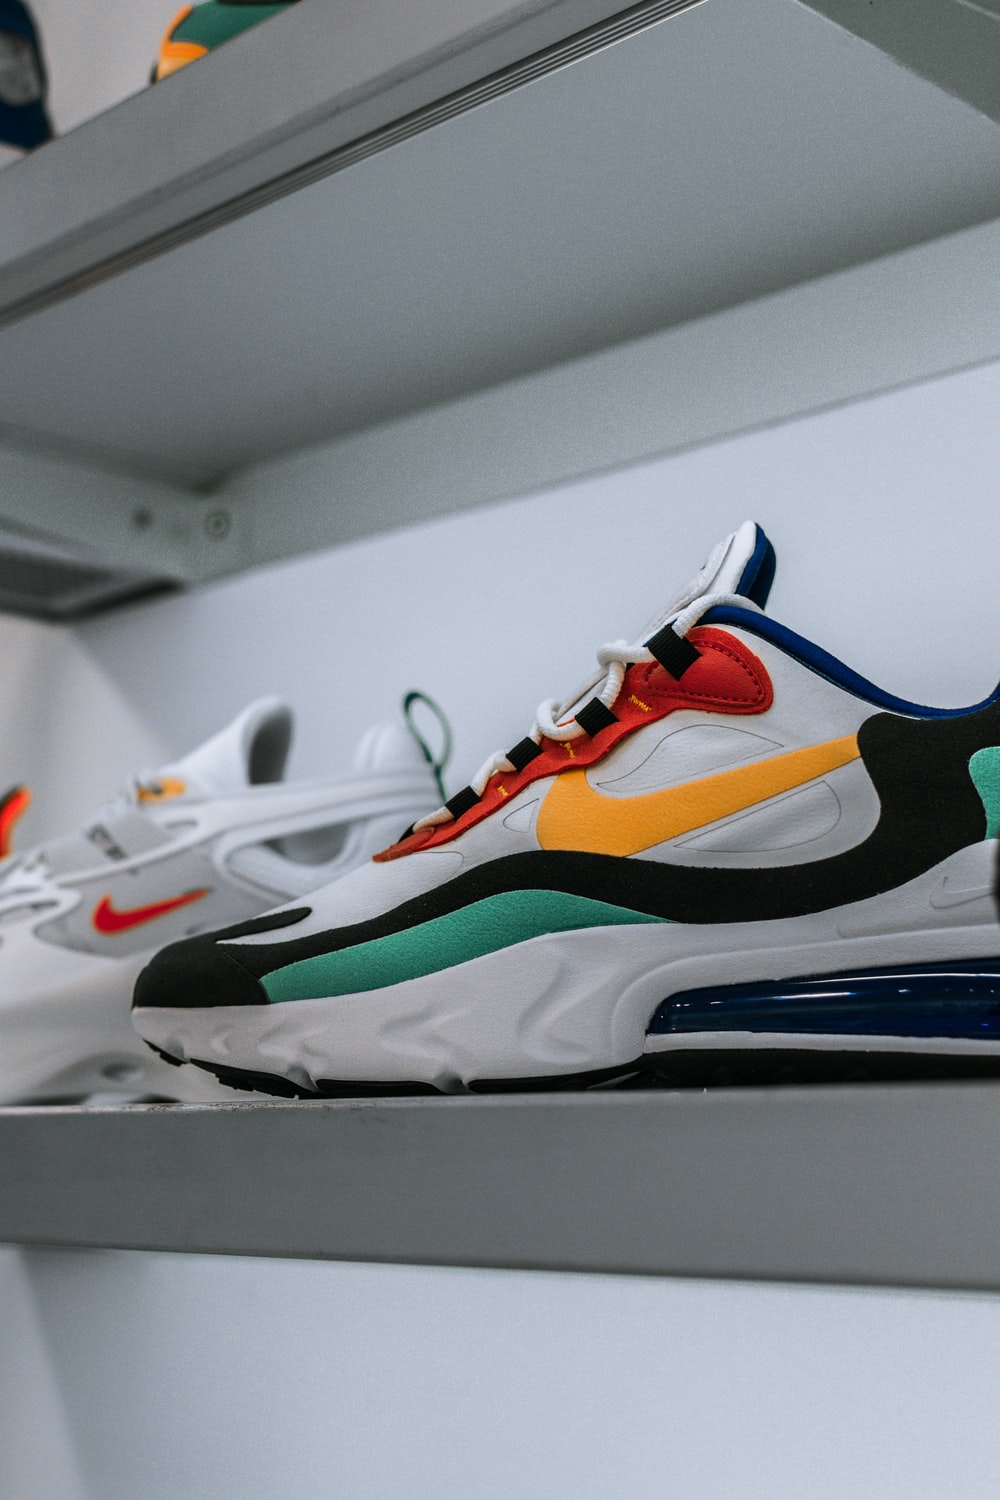 Nike Air Max Picture. Download Free Image